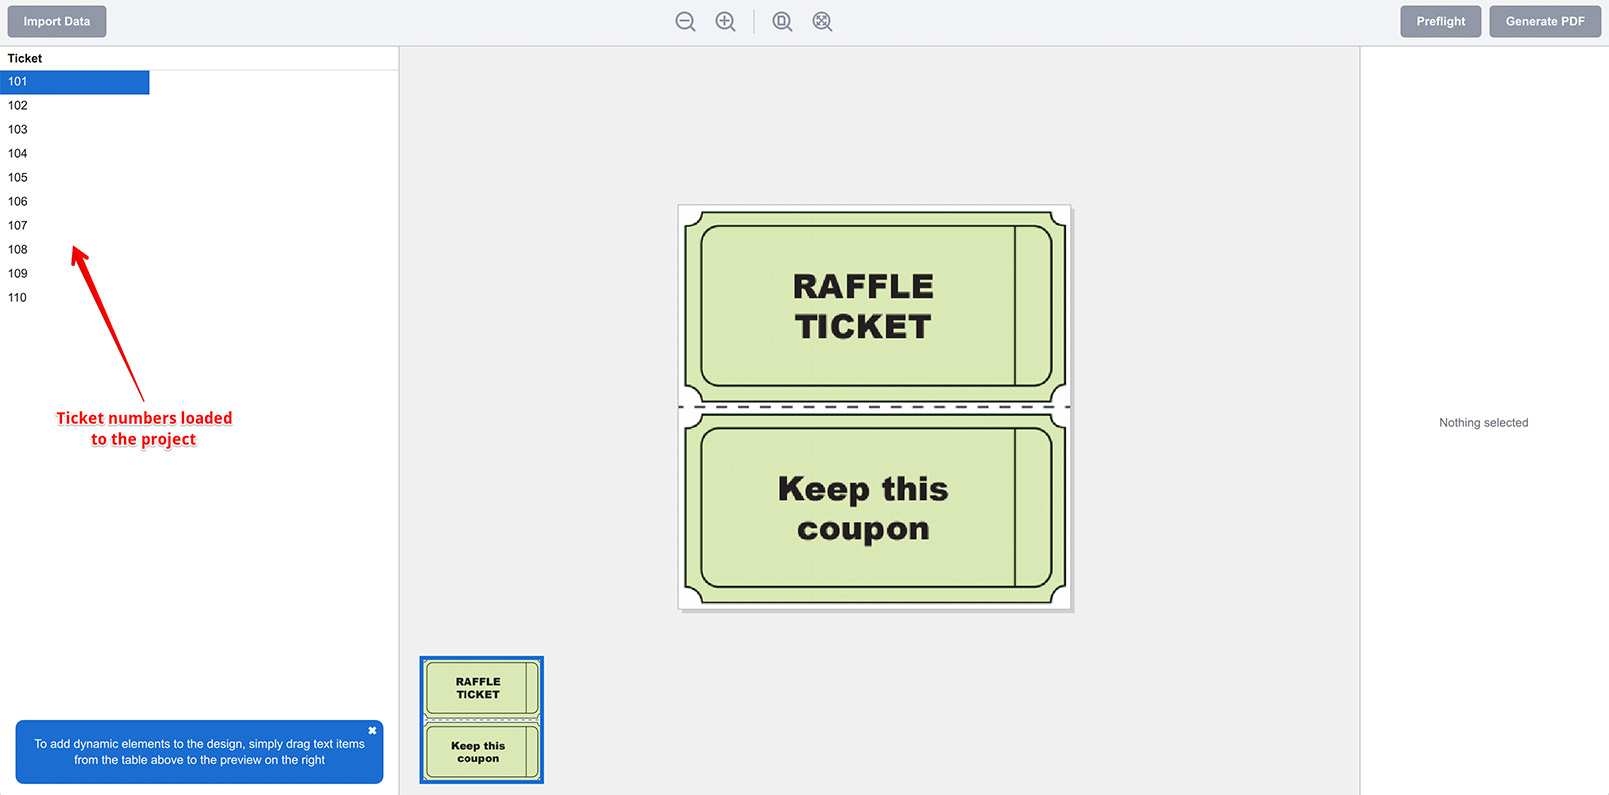 Raffle ticket data loaded to the Ticket Wizard project